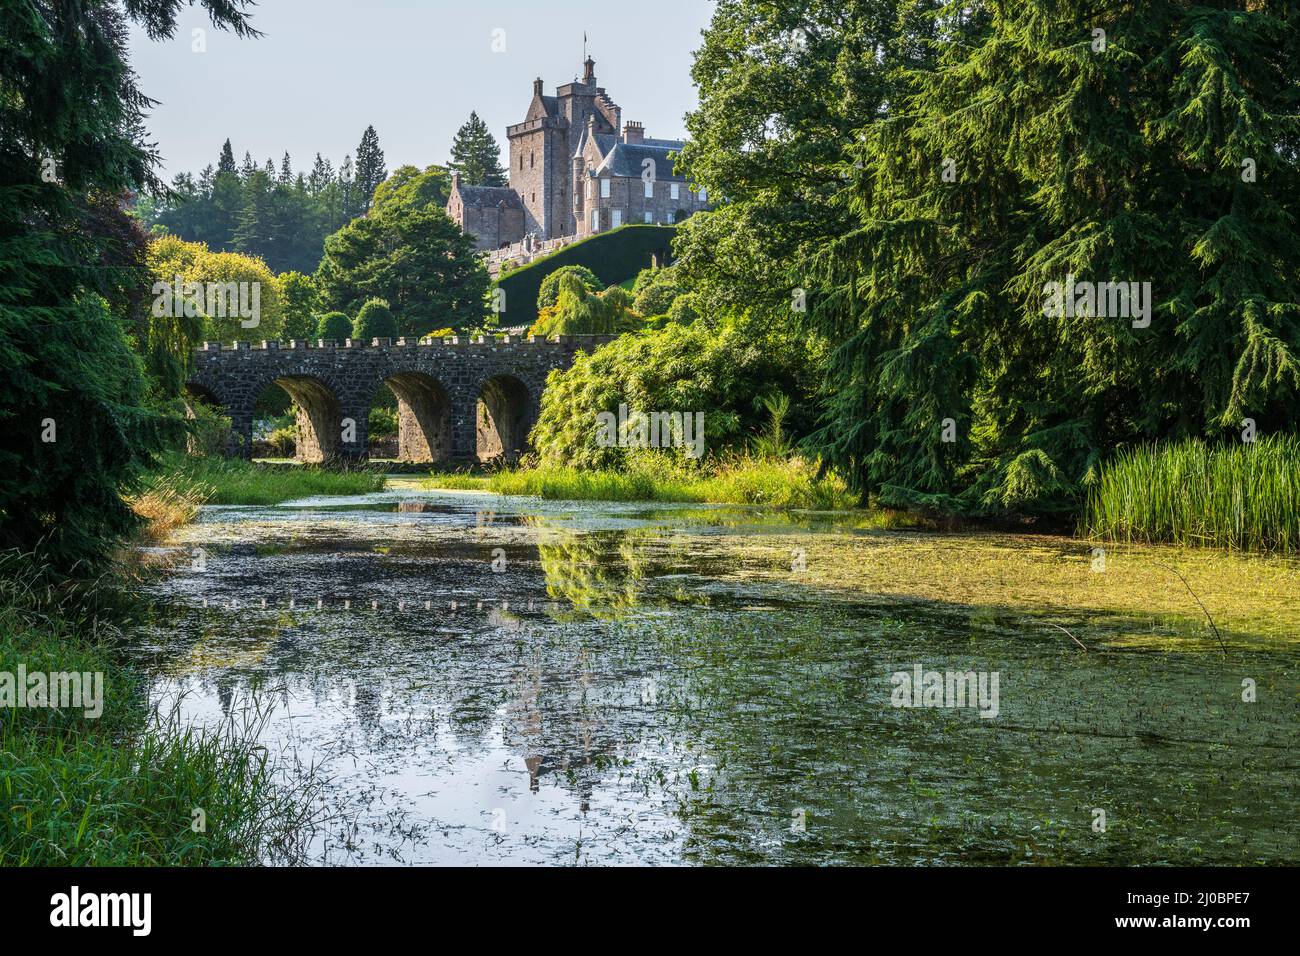 View of Drummond Castle and stone bridge from the pond - Drummond Castle near Crieff in Perthshire, Scotland, UK Stock Photo